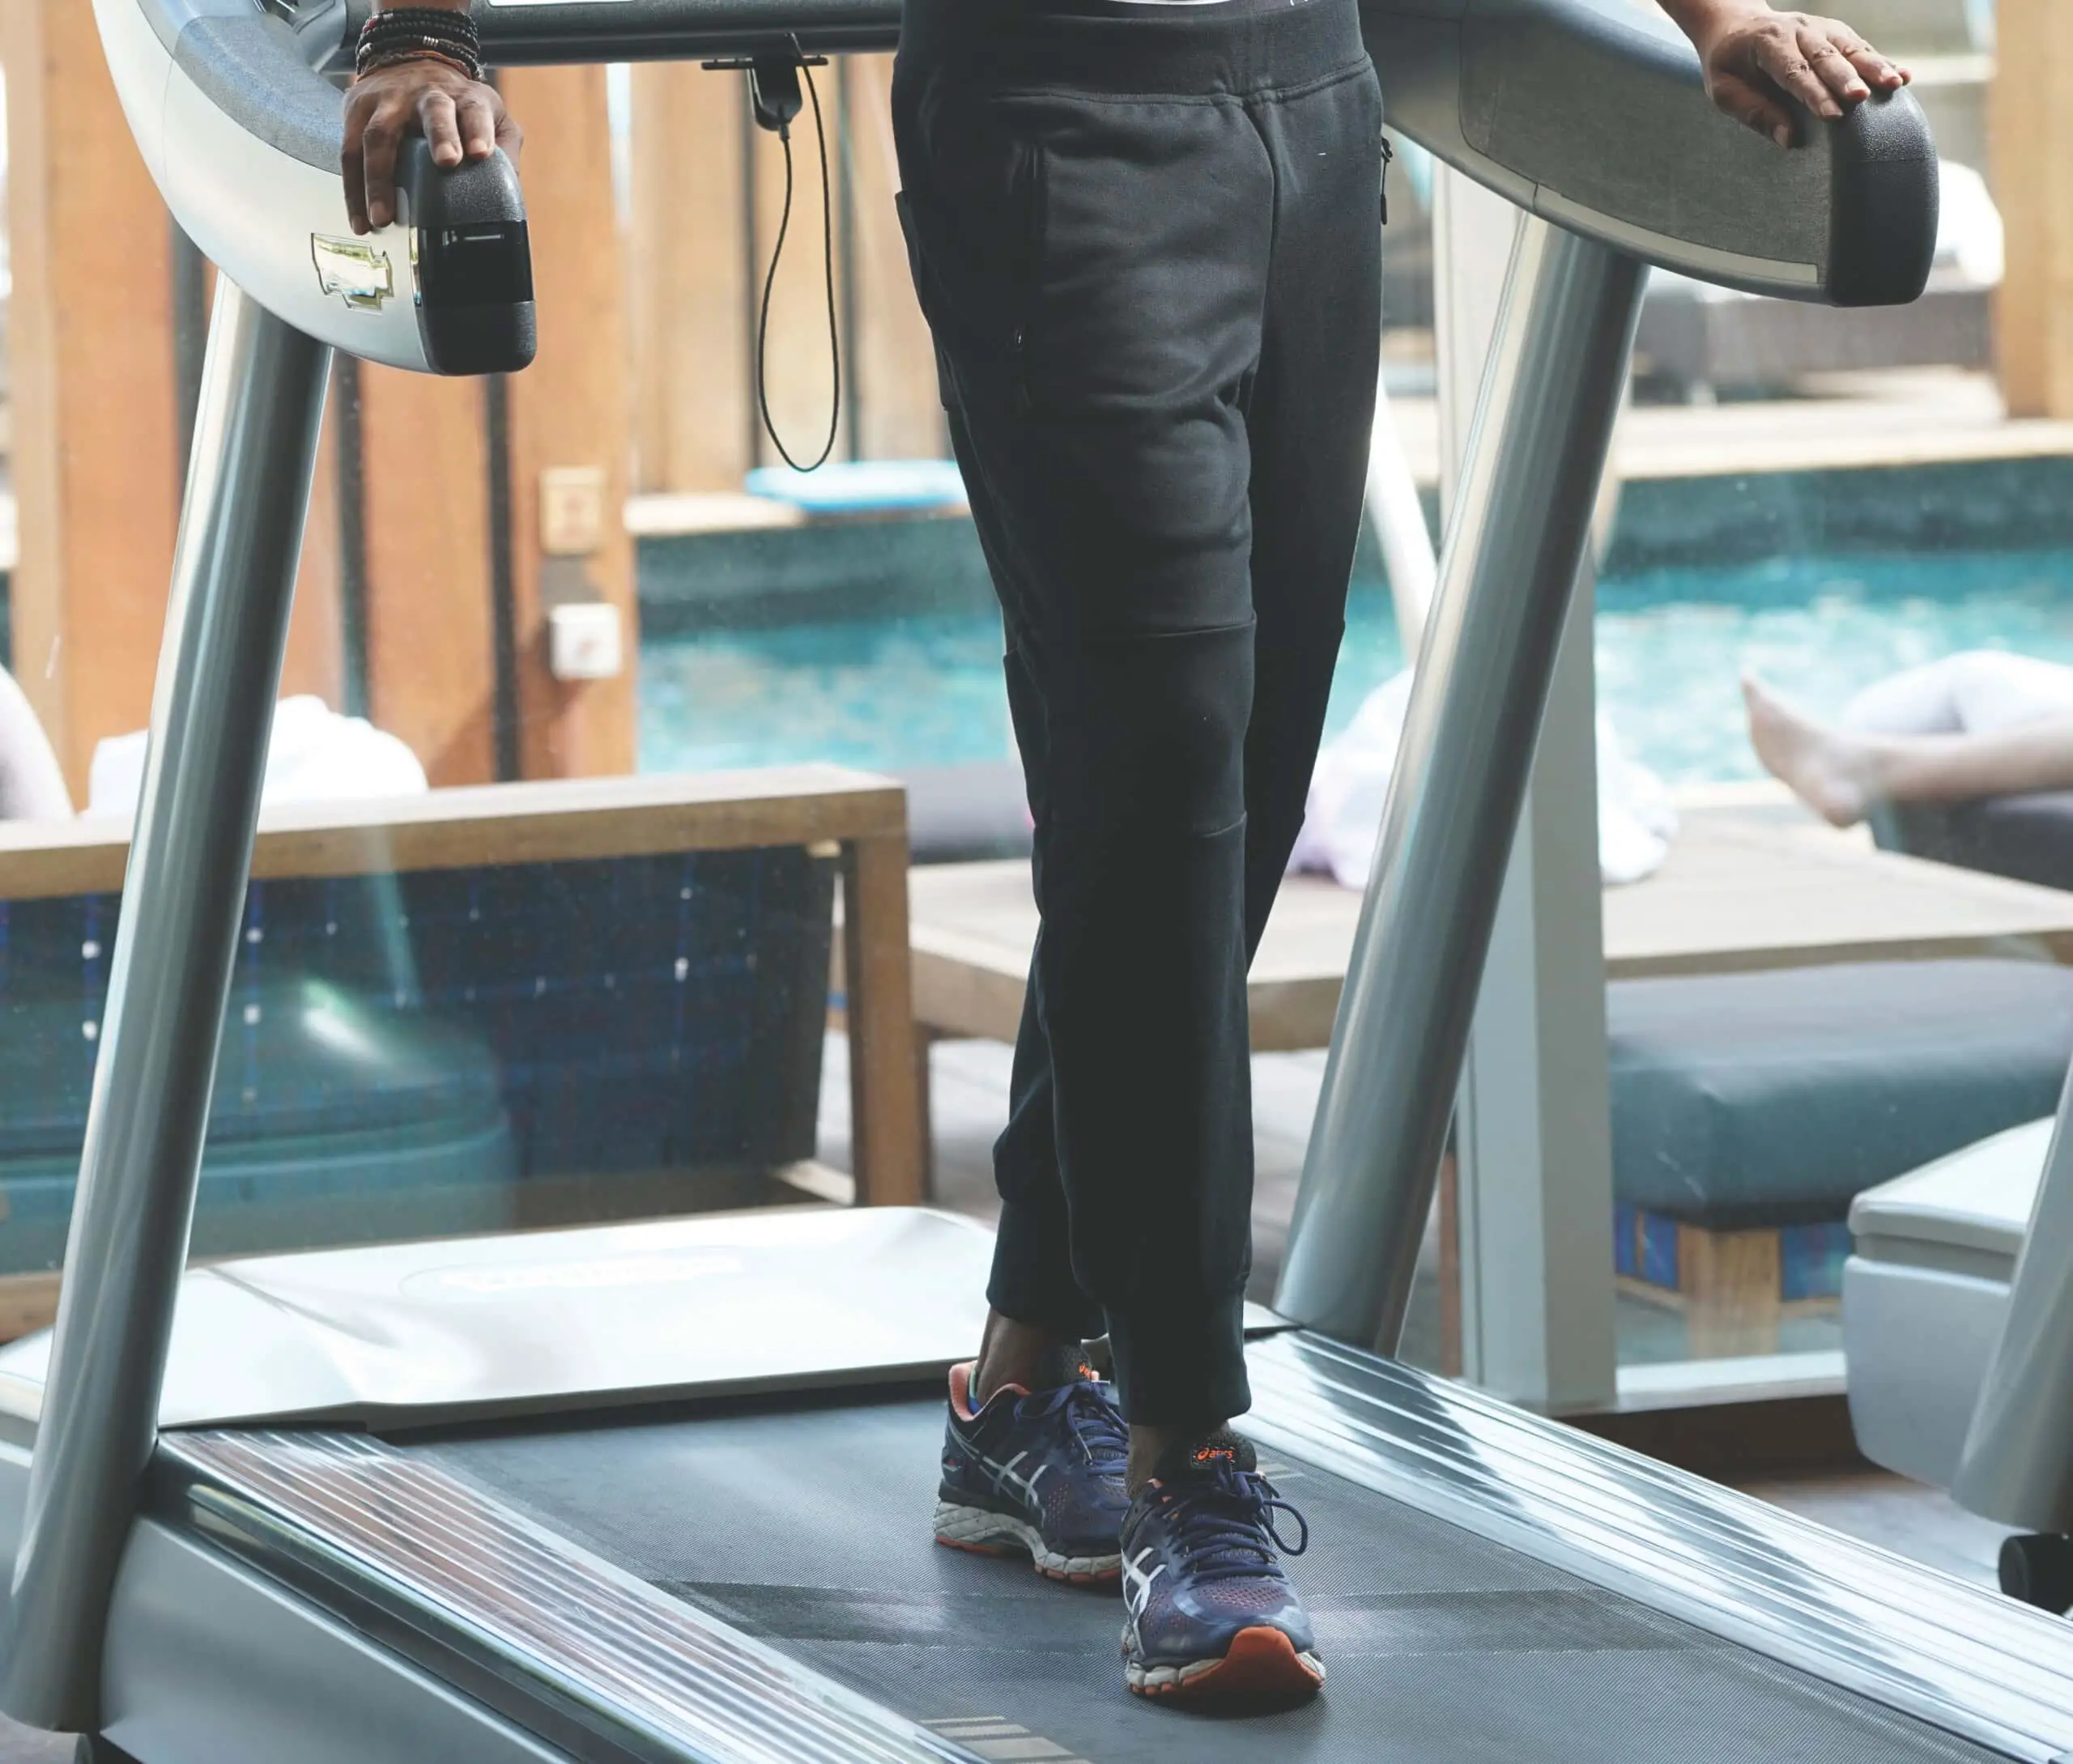 Walk Backward on a Treadmill for Low Back Pain Relief » Scary Symptoms